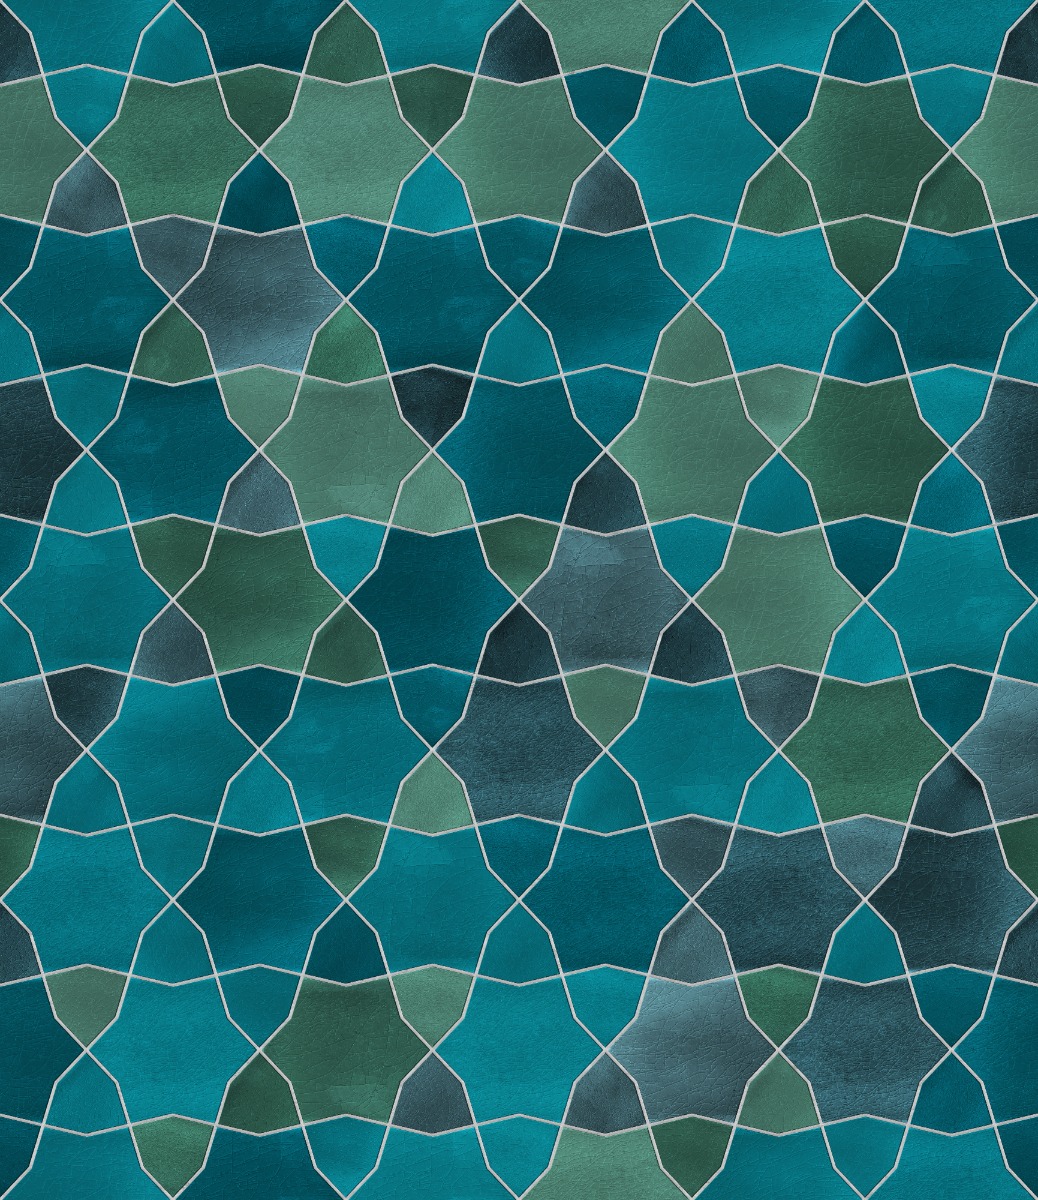 A seamless tile texture with victorian glazed tiles arranged in a 6 Point Star Mosaic pattern